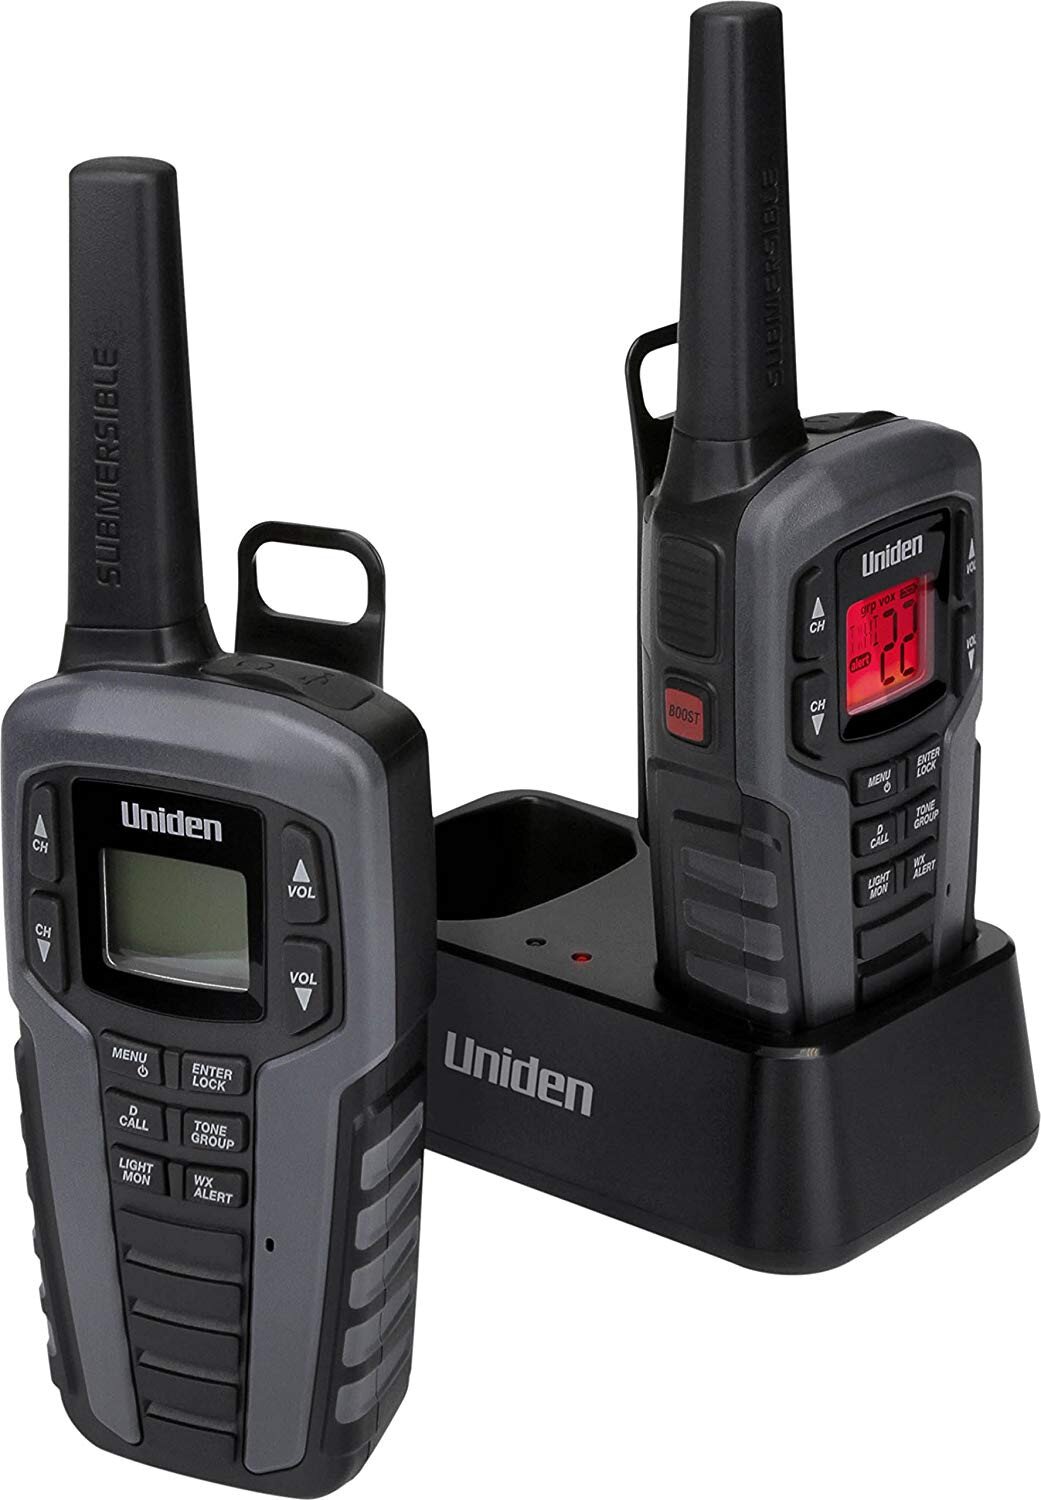 Buy Uniden Two-Way Radio w/Charger  Headset online in UAE UAE